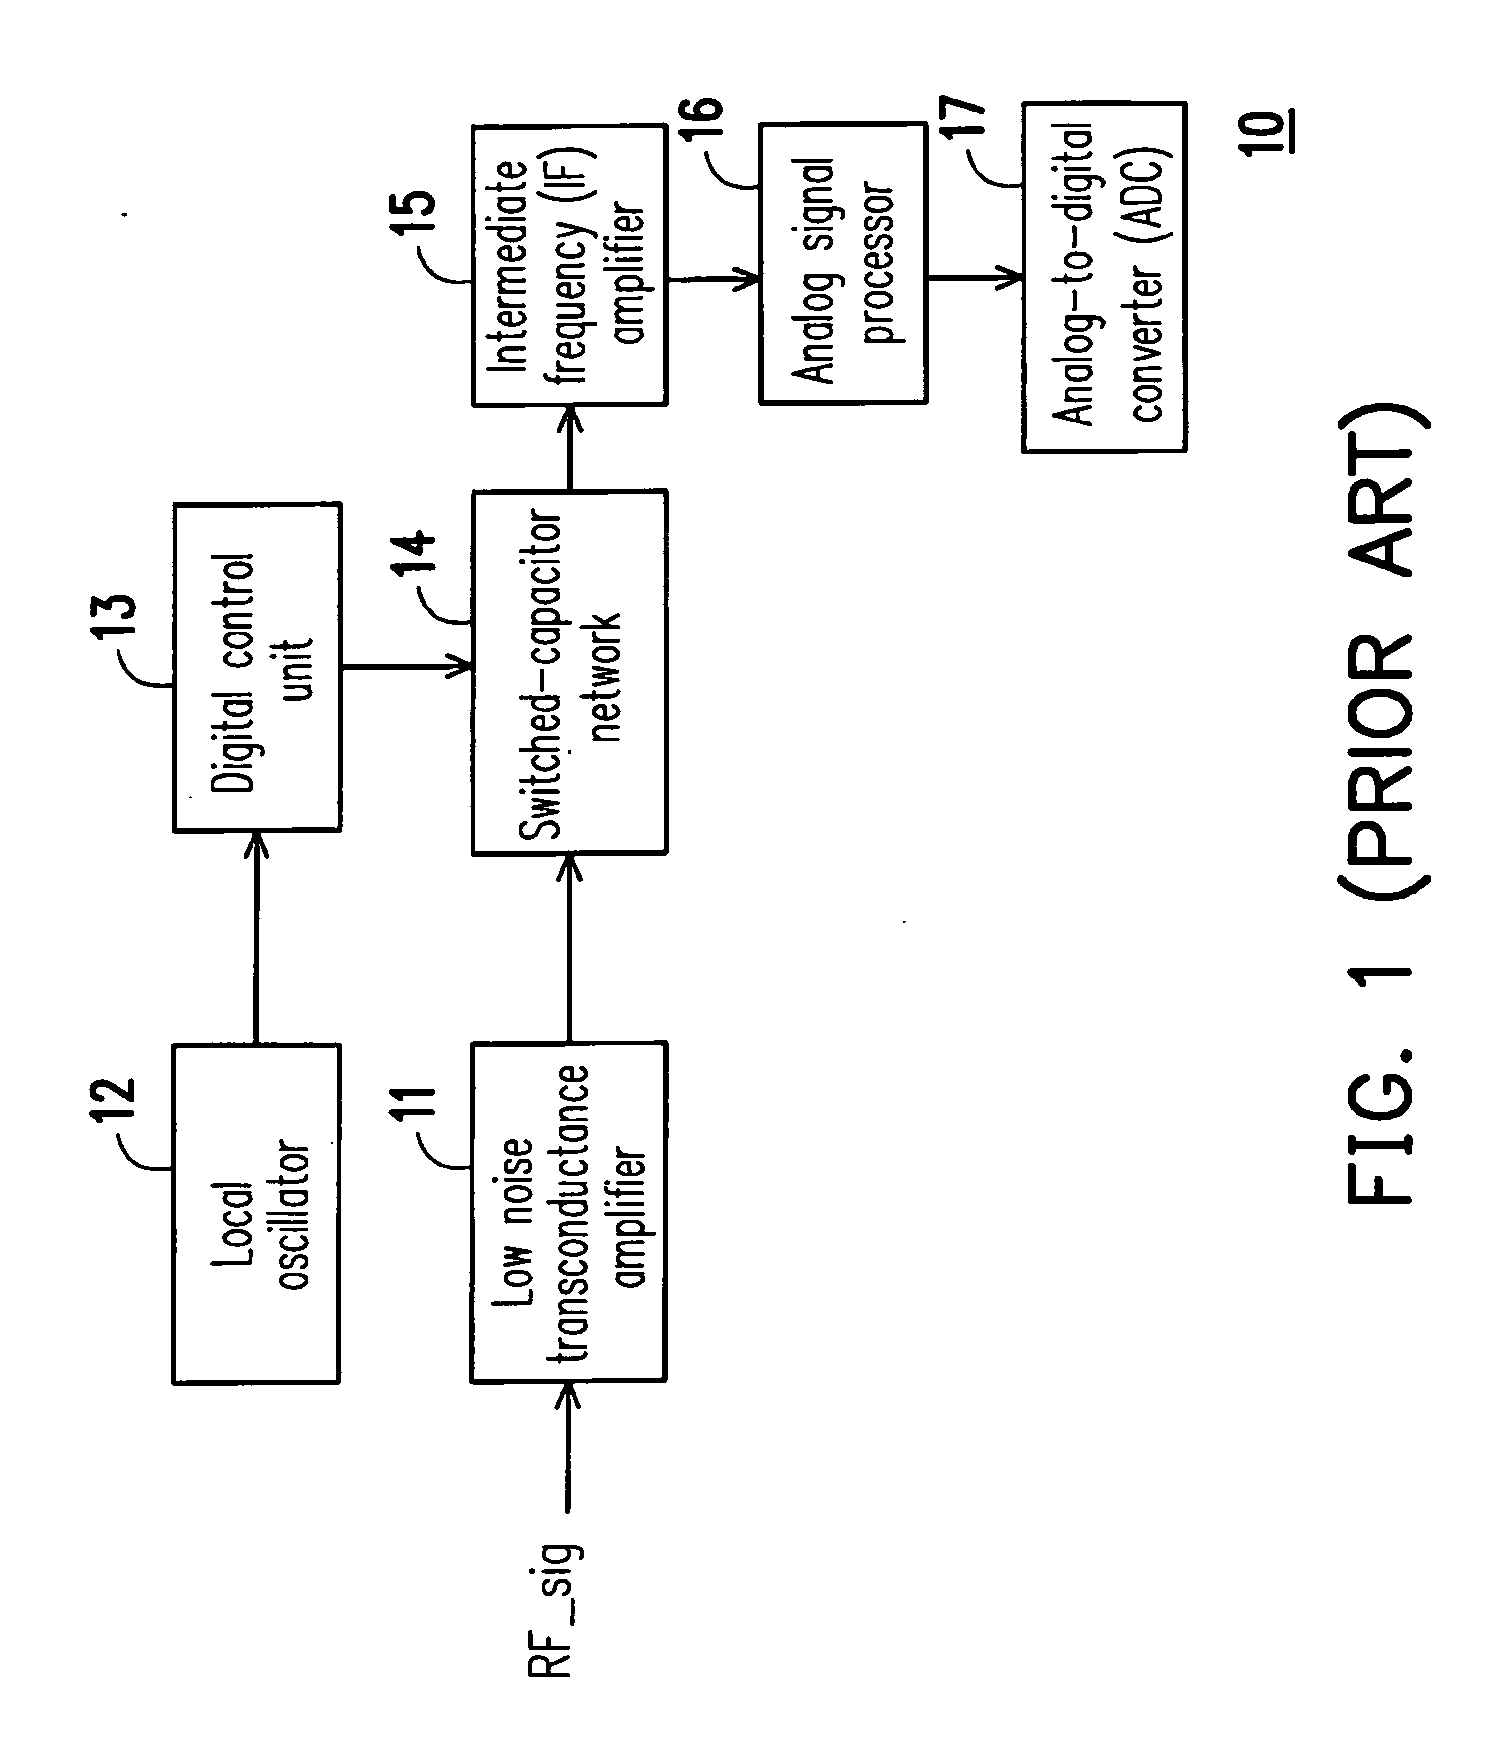 Receiver with discrete-time filtering and down-conversion